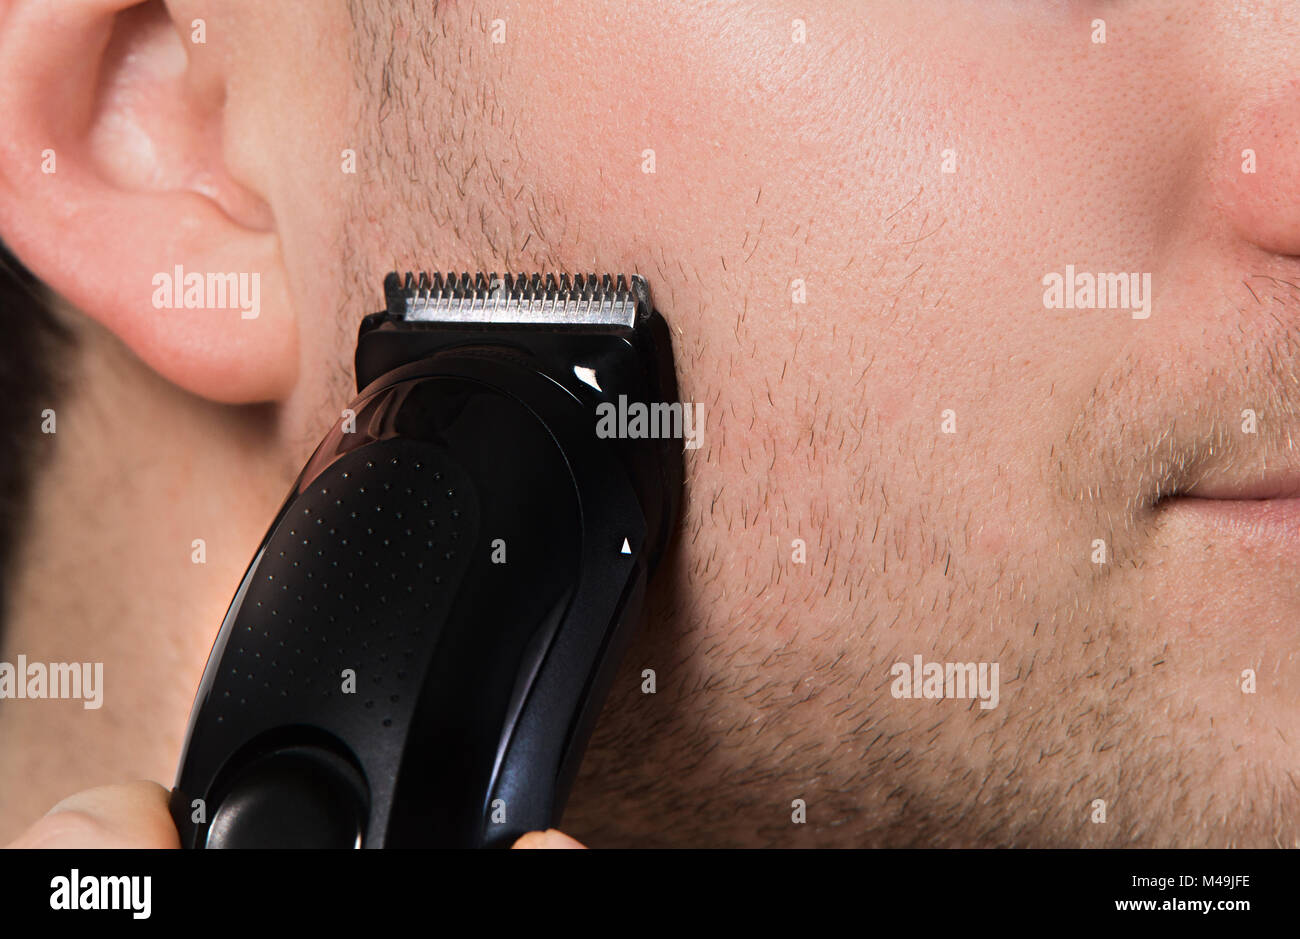 electric trimmer face